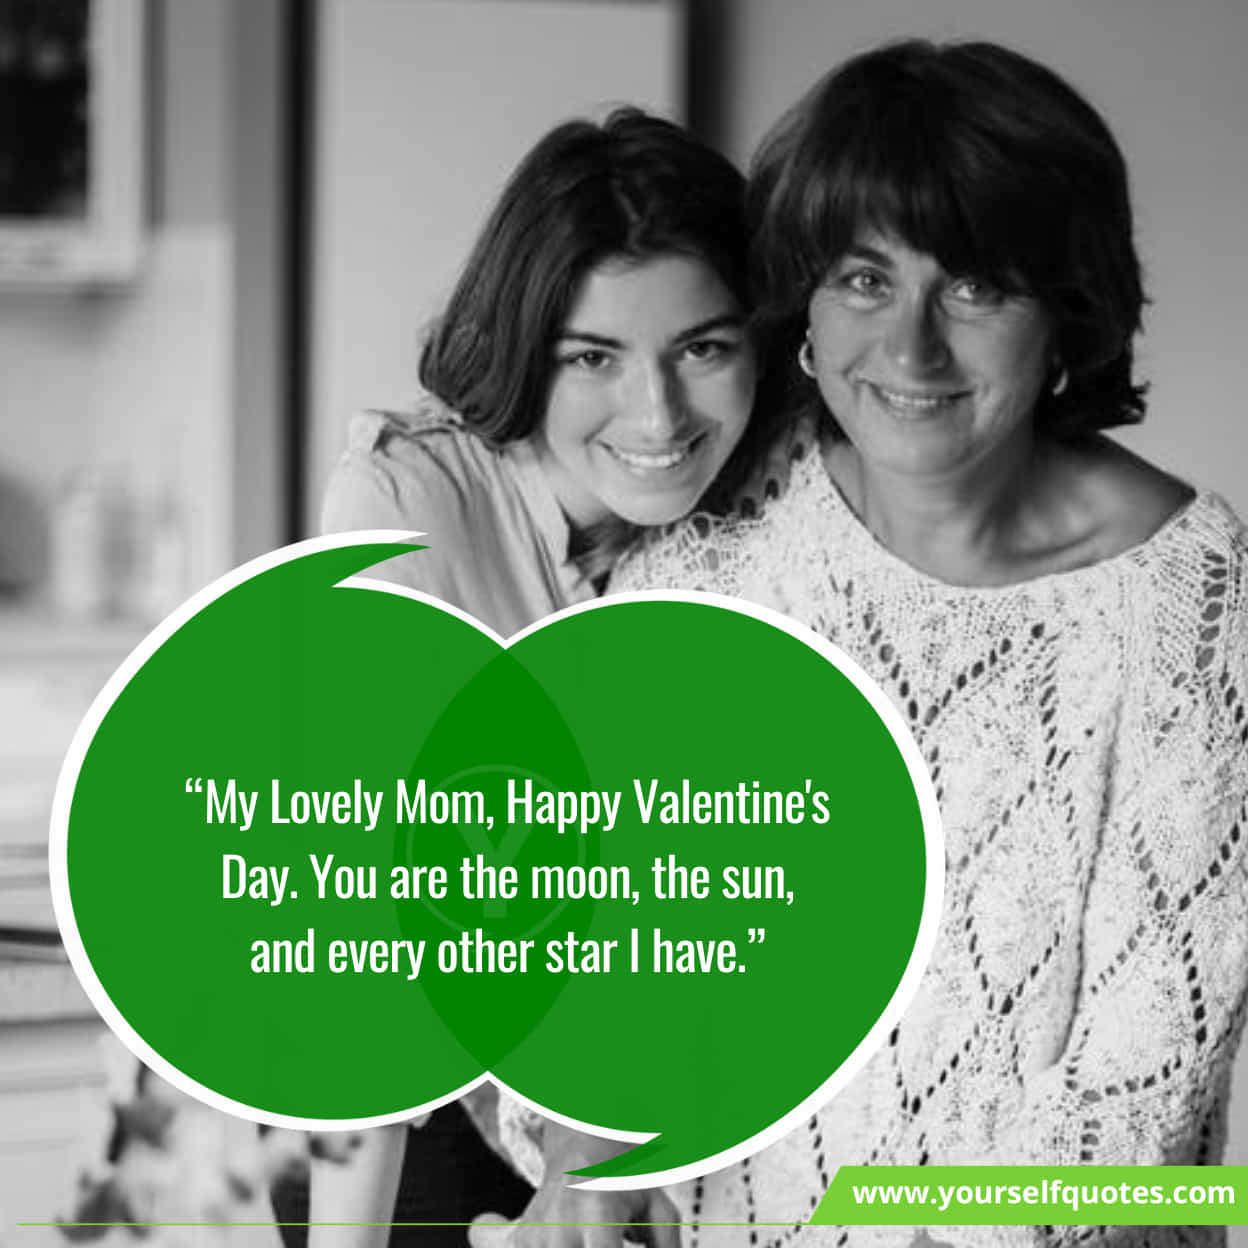 Best Happy Valentine's Day Messages for Mom